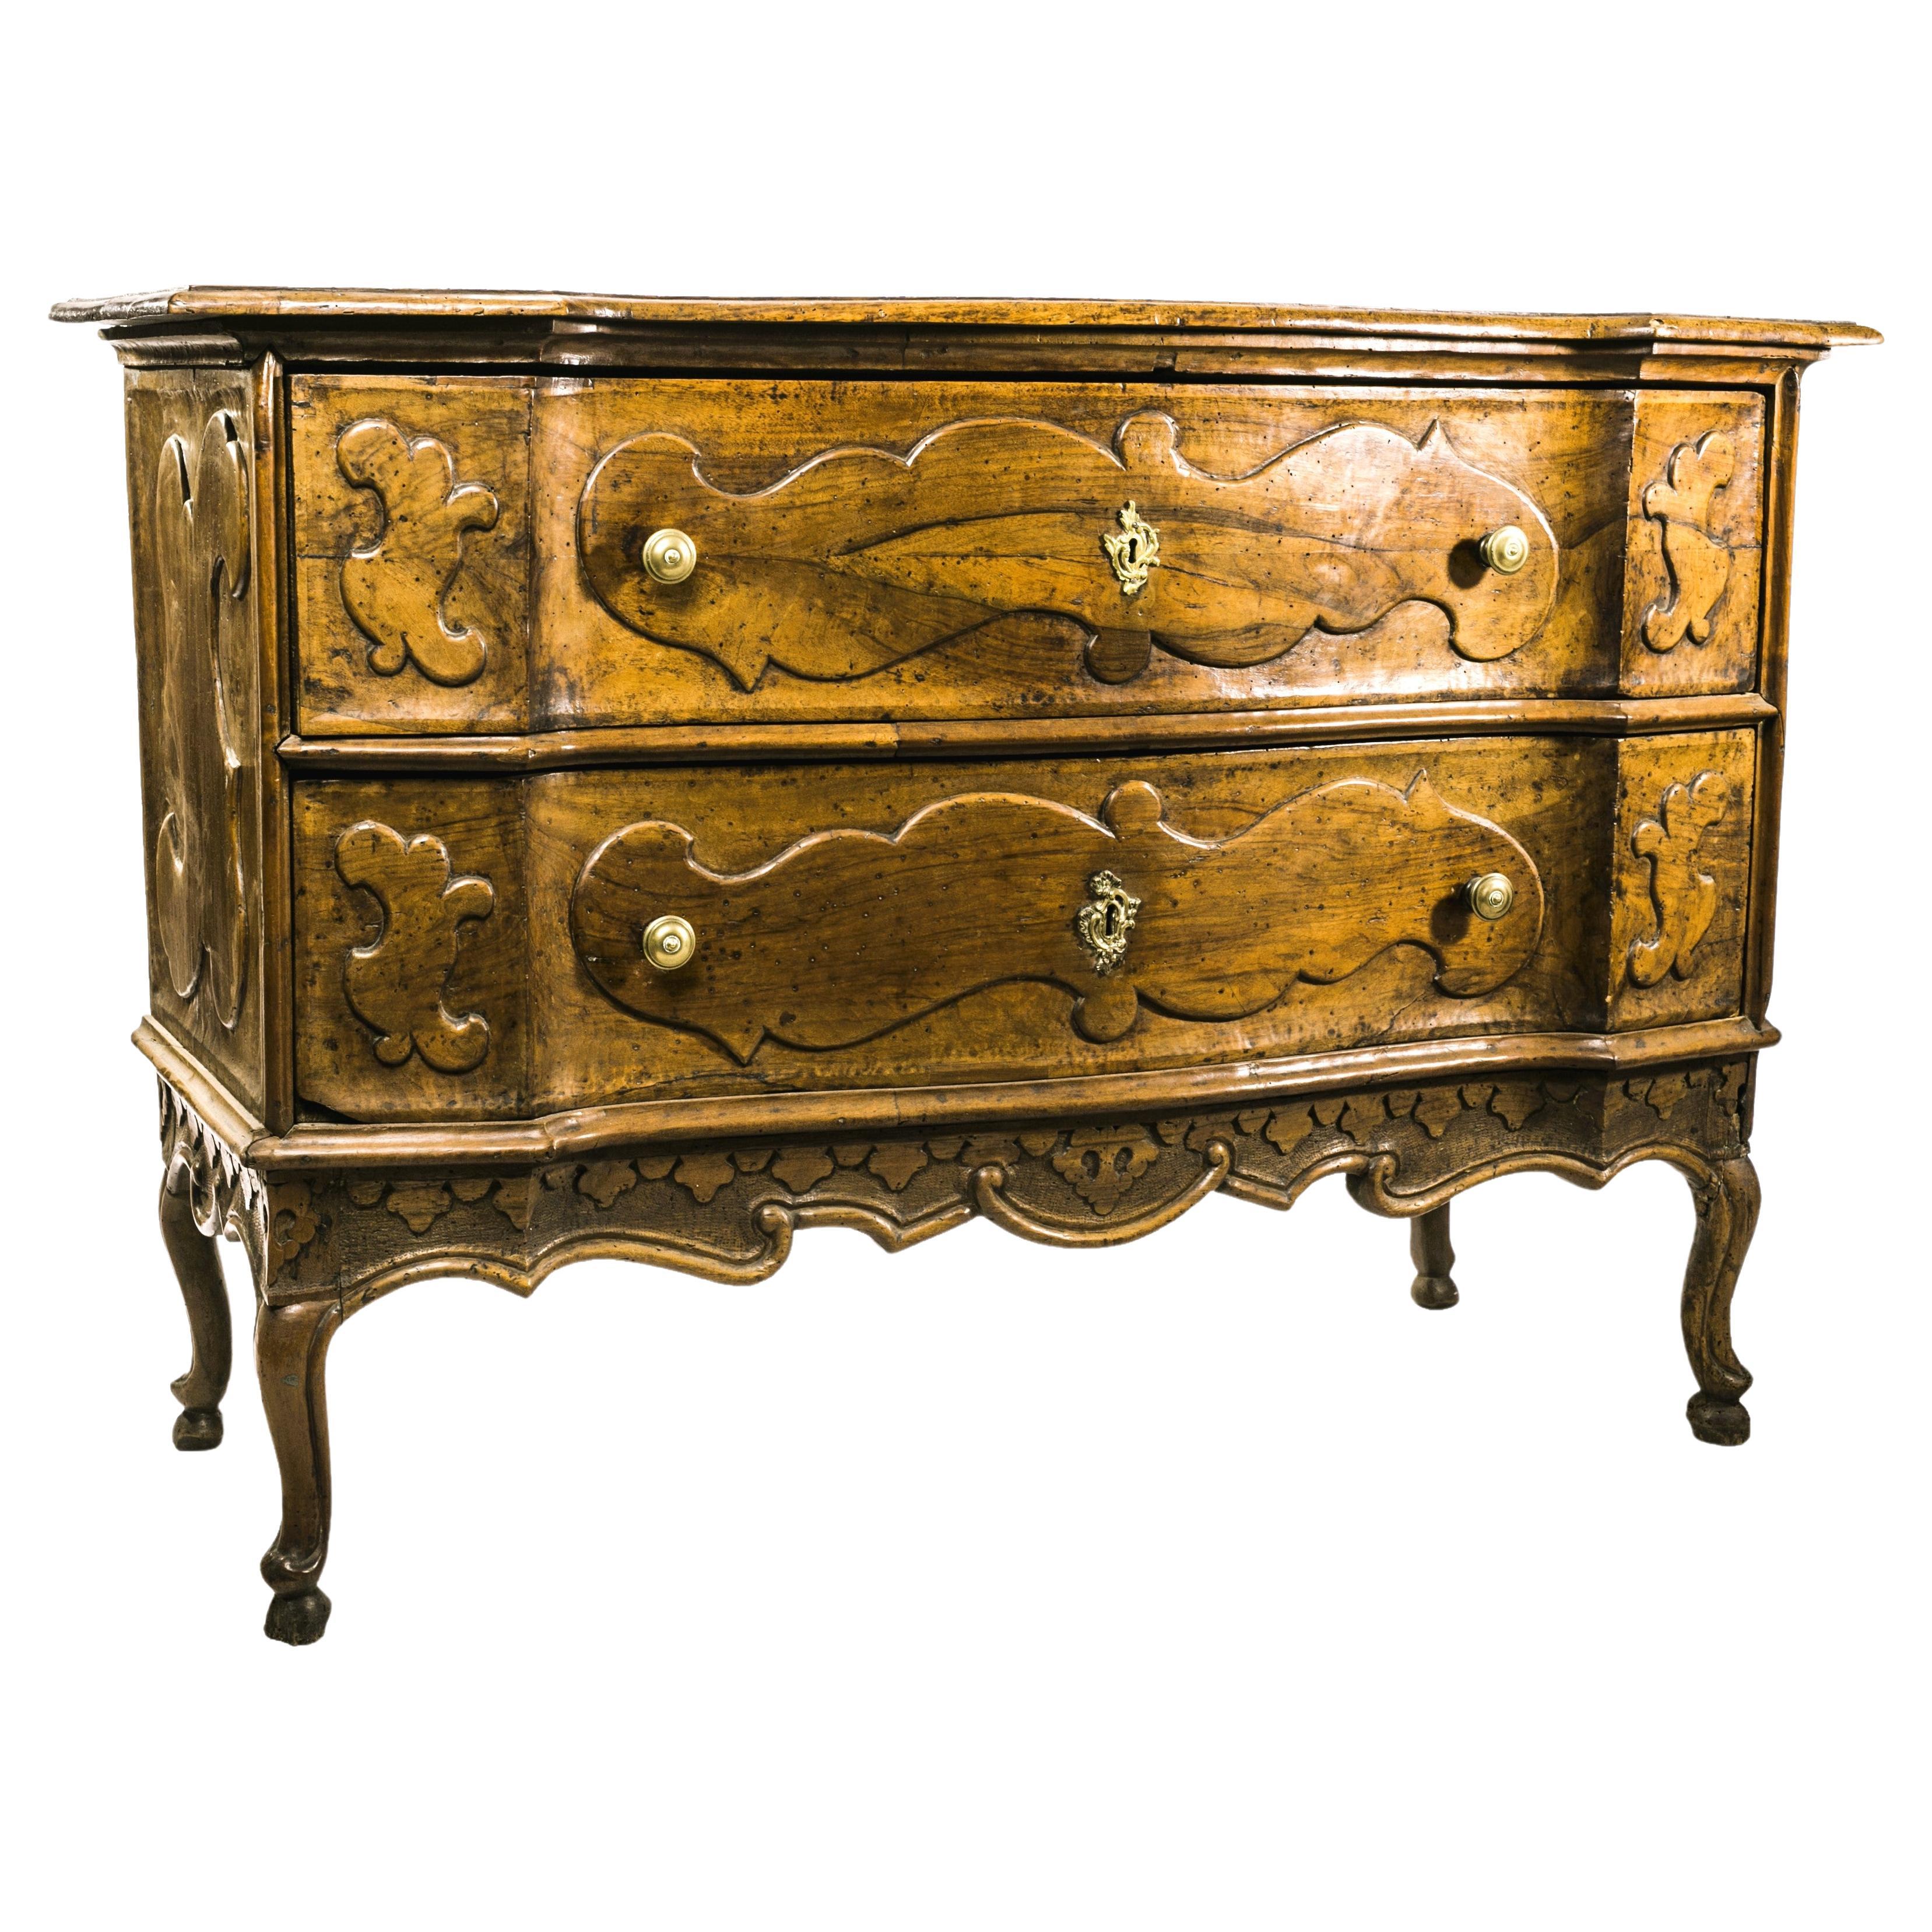 1720s Commodes and Chests of Drawers